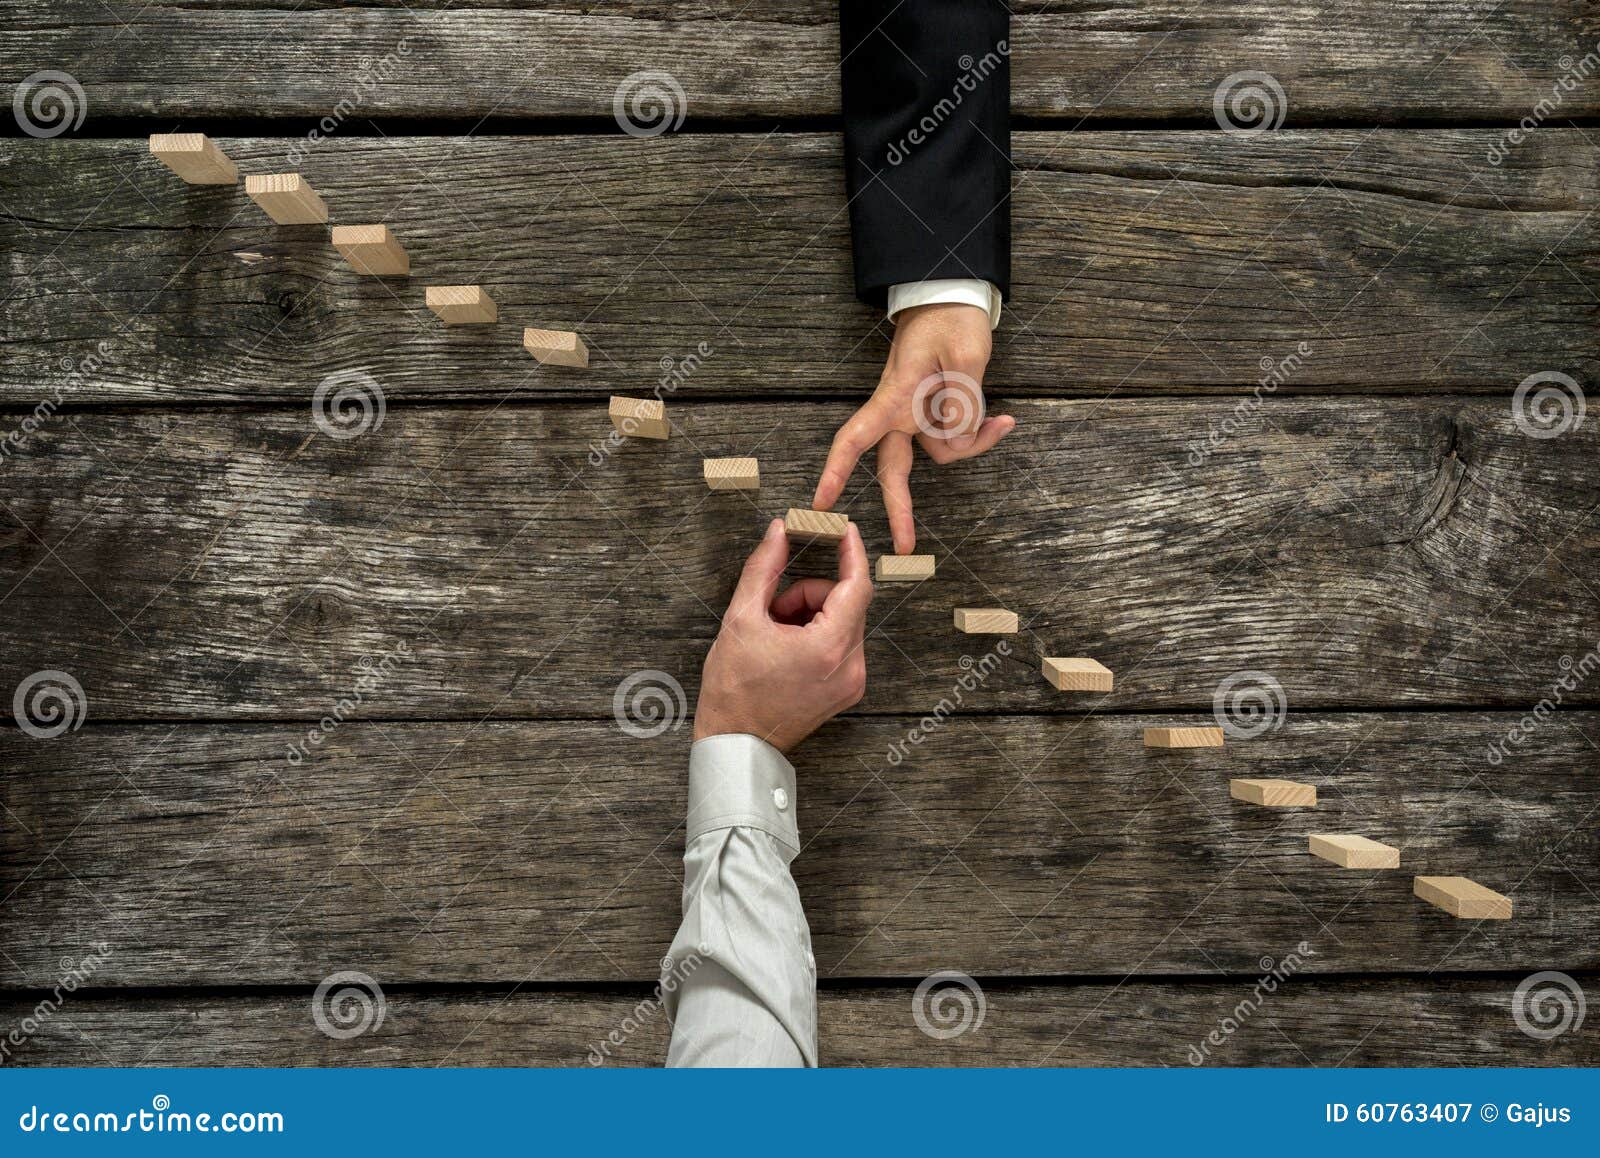 conceptual image of business partnership and support